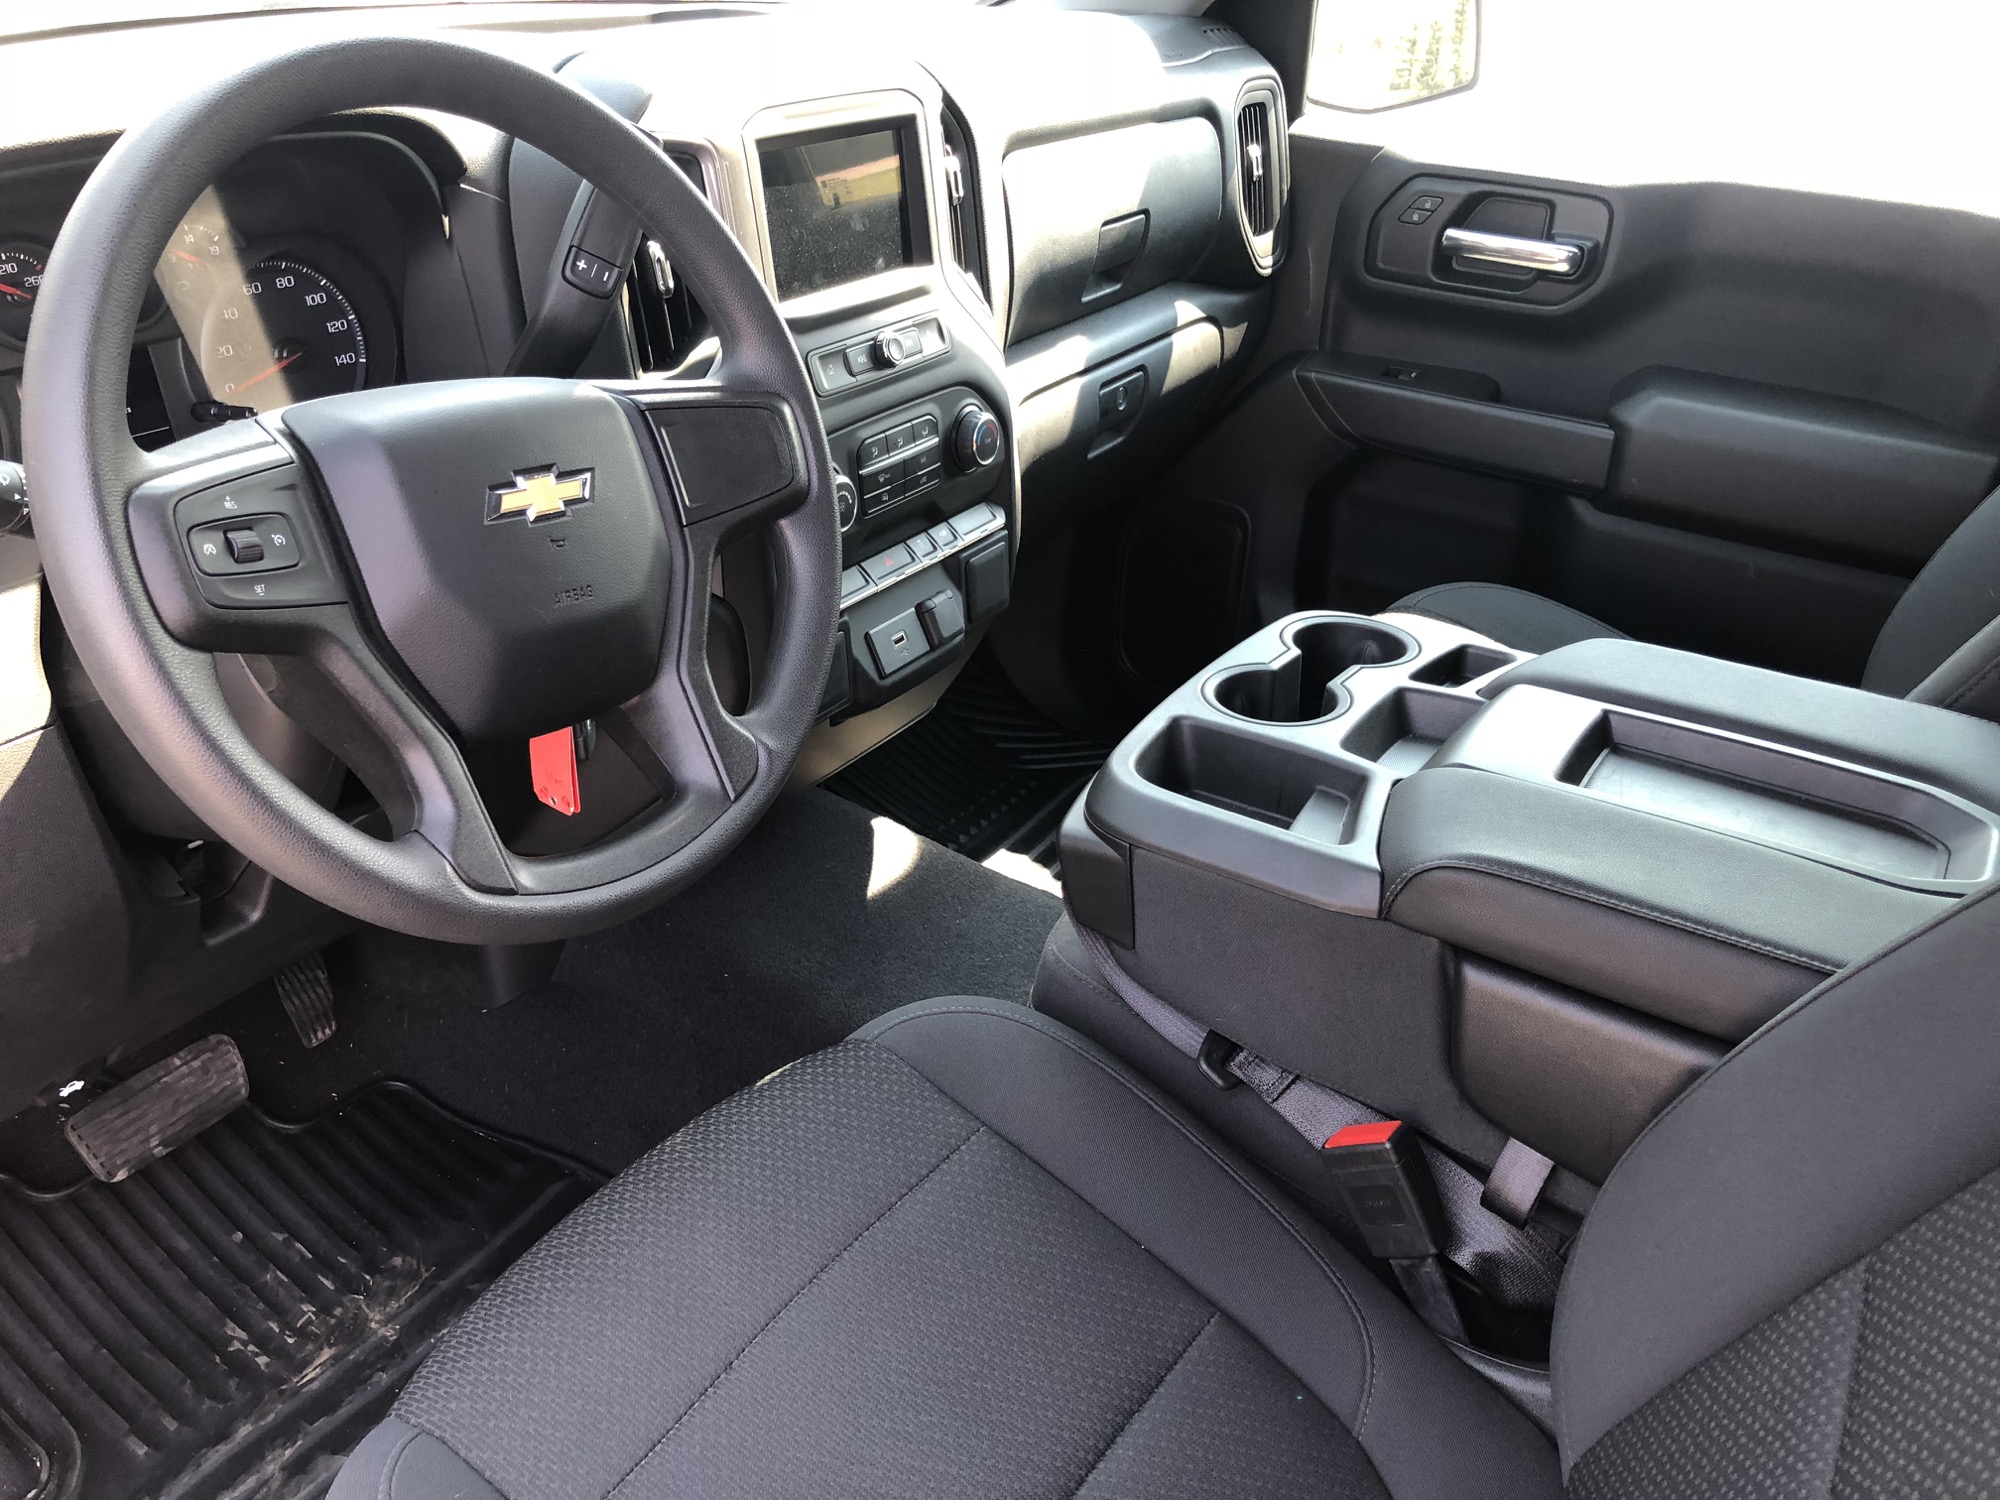 all-new fourth-generation Silverado continues, this time with interior phot...